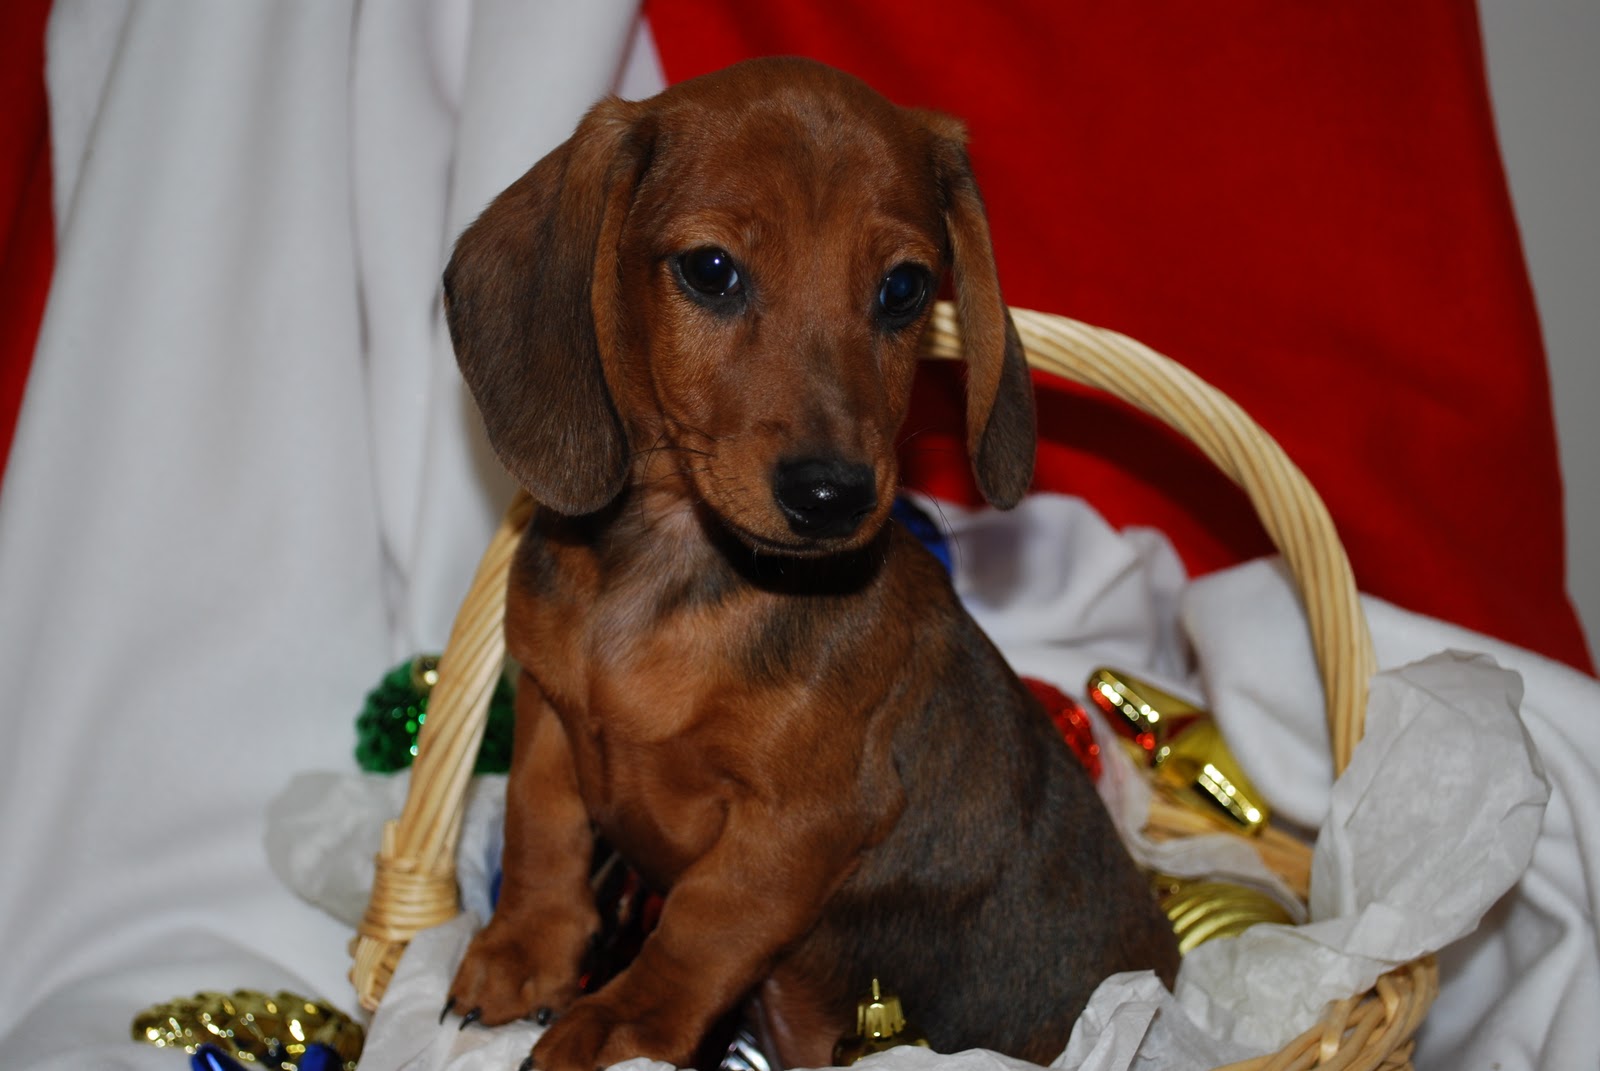 Dachshunds, Doxies, or Wiener Dogs?